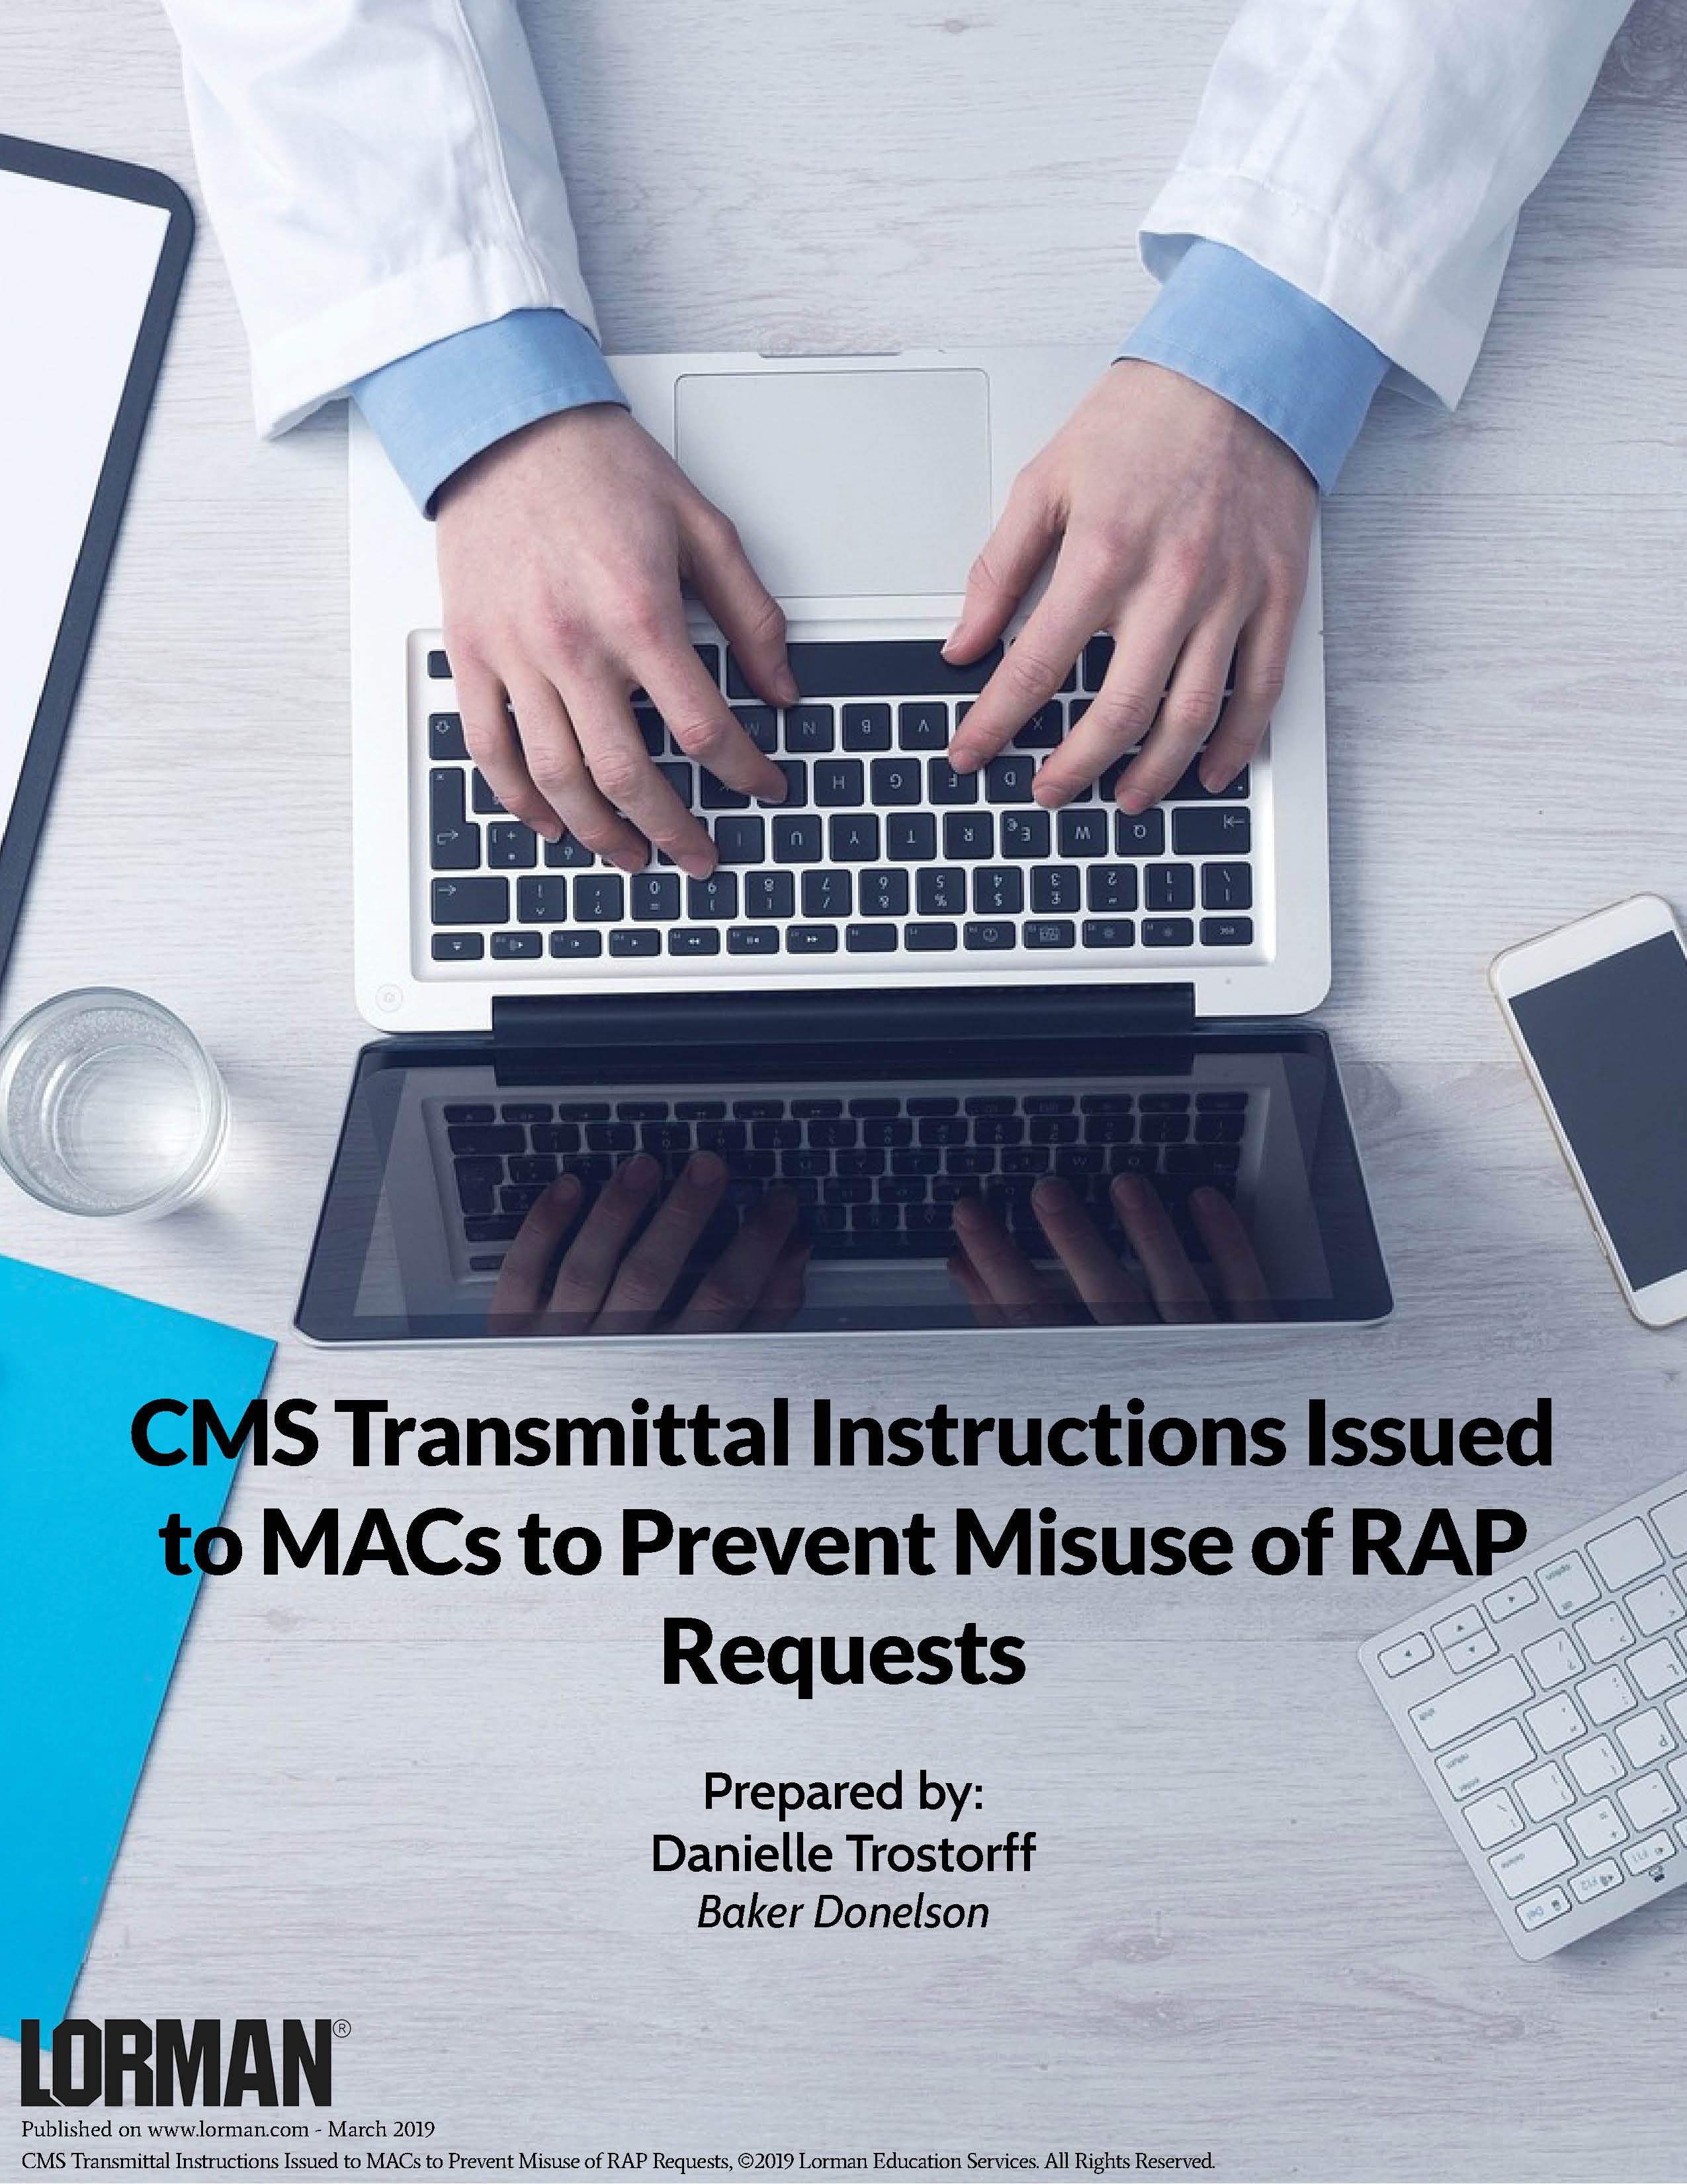 CMS Transmittal Instructions Issued to MACs to Prevent Misuse of RAP Requests